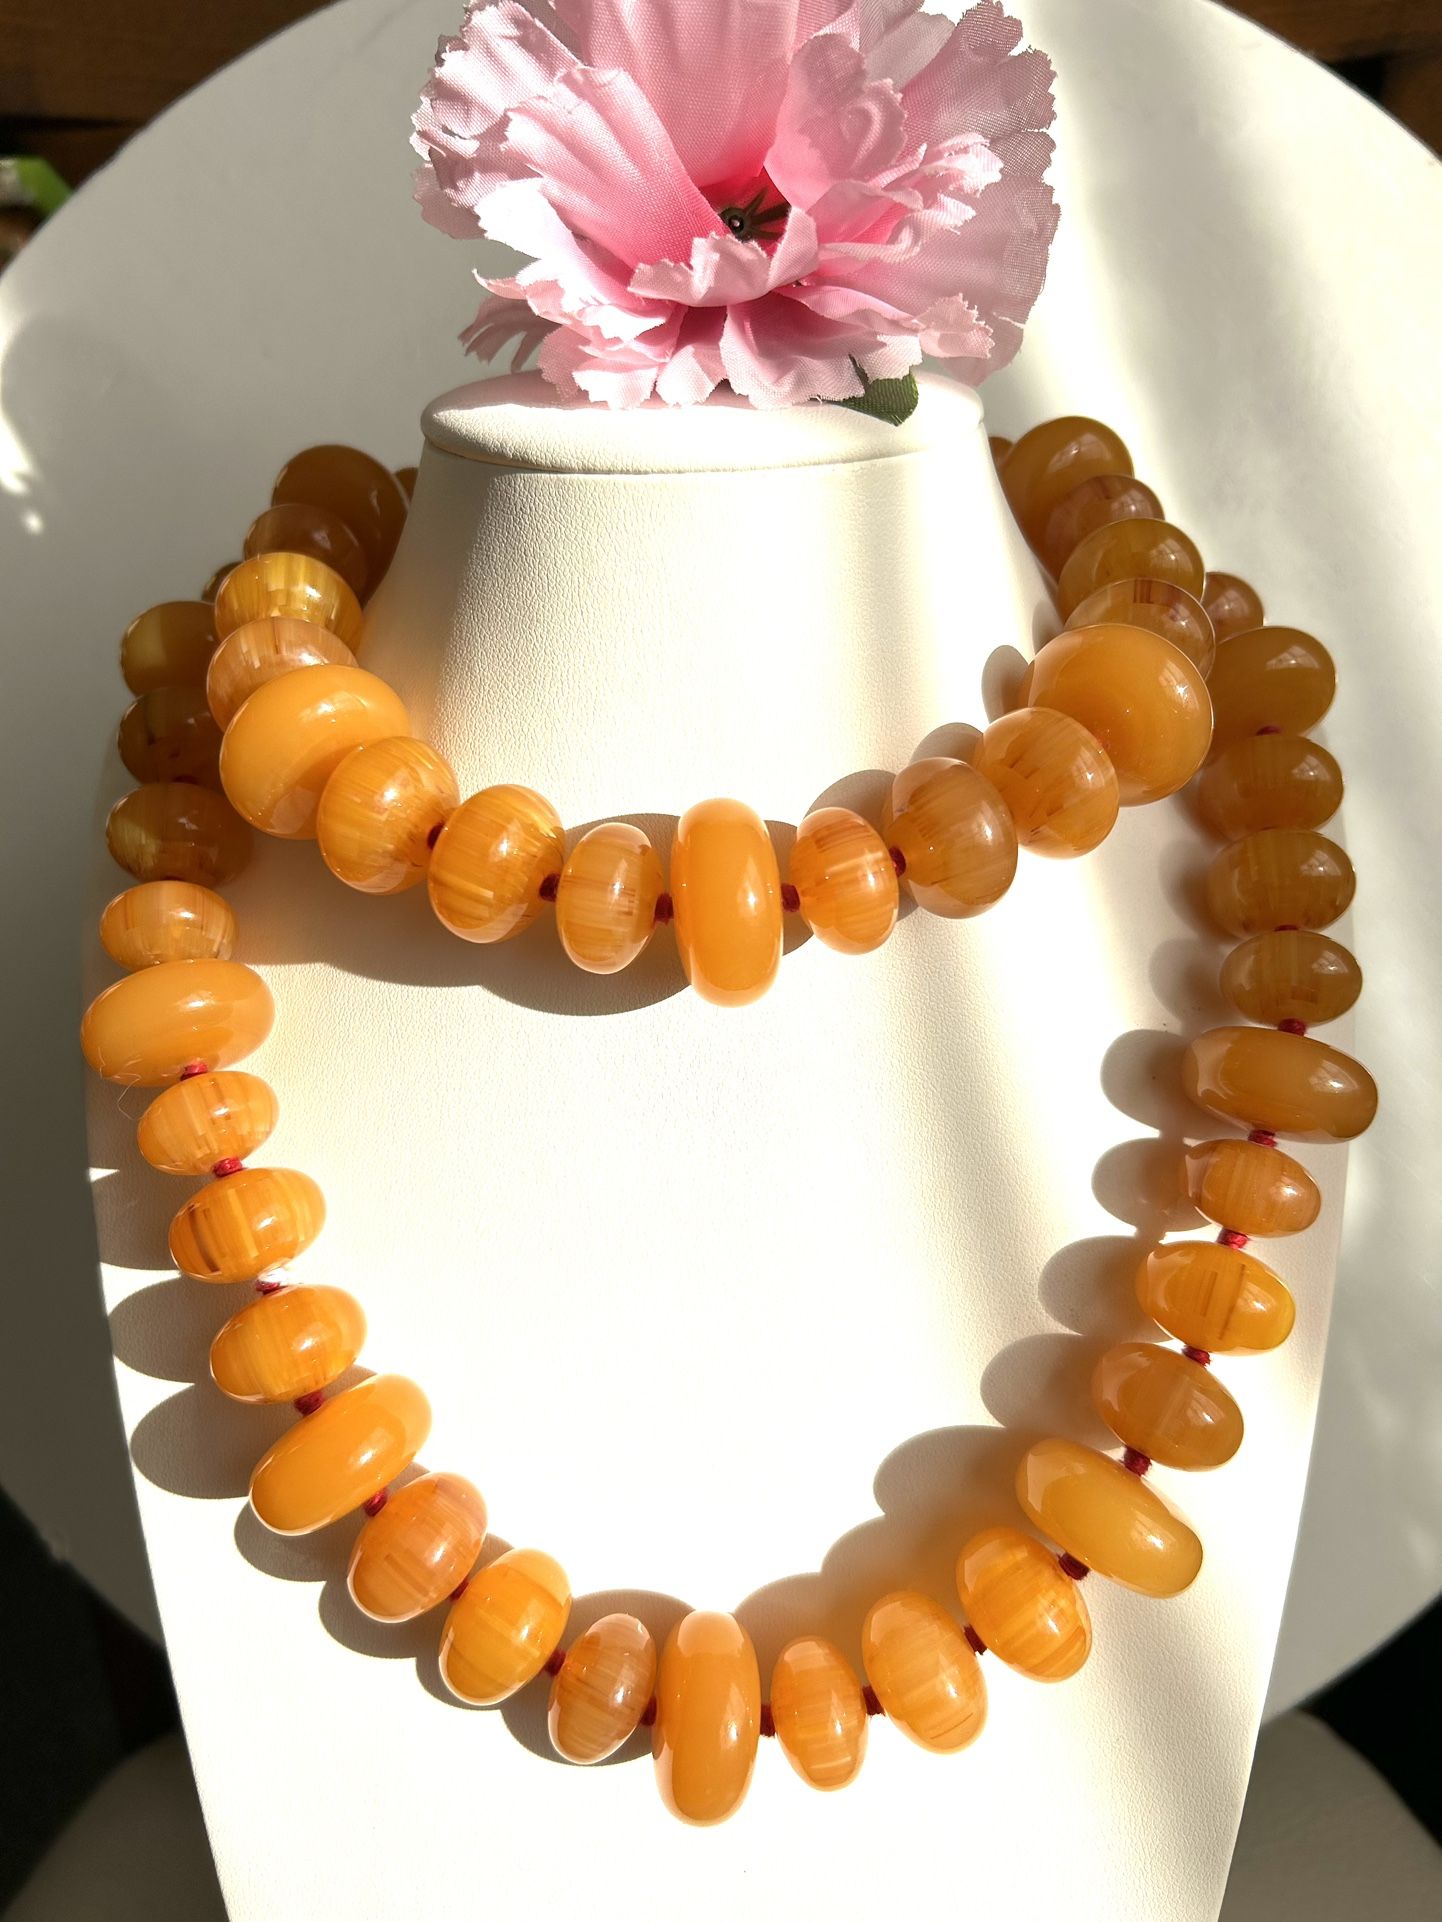 Vintage/Rare Shiny Hand knotted Beeswax Amber necklace 37”inch long